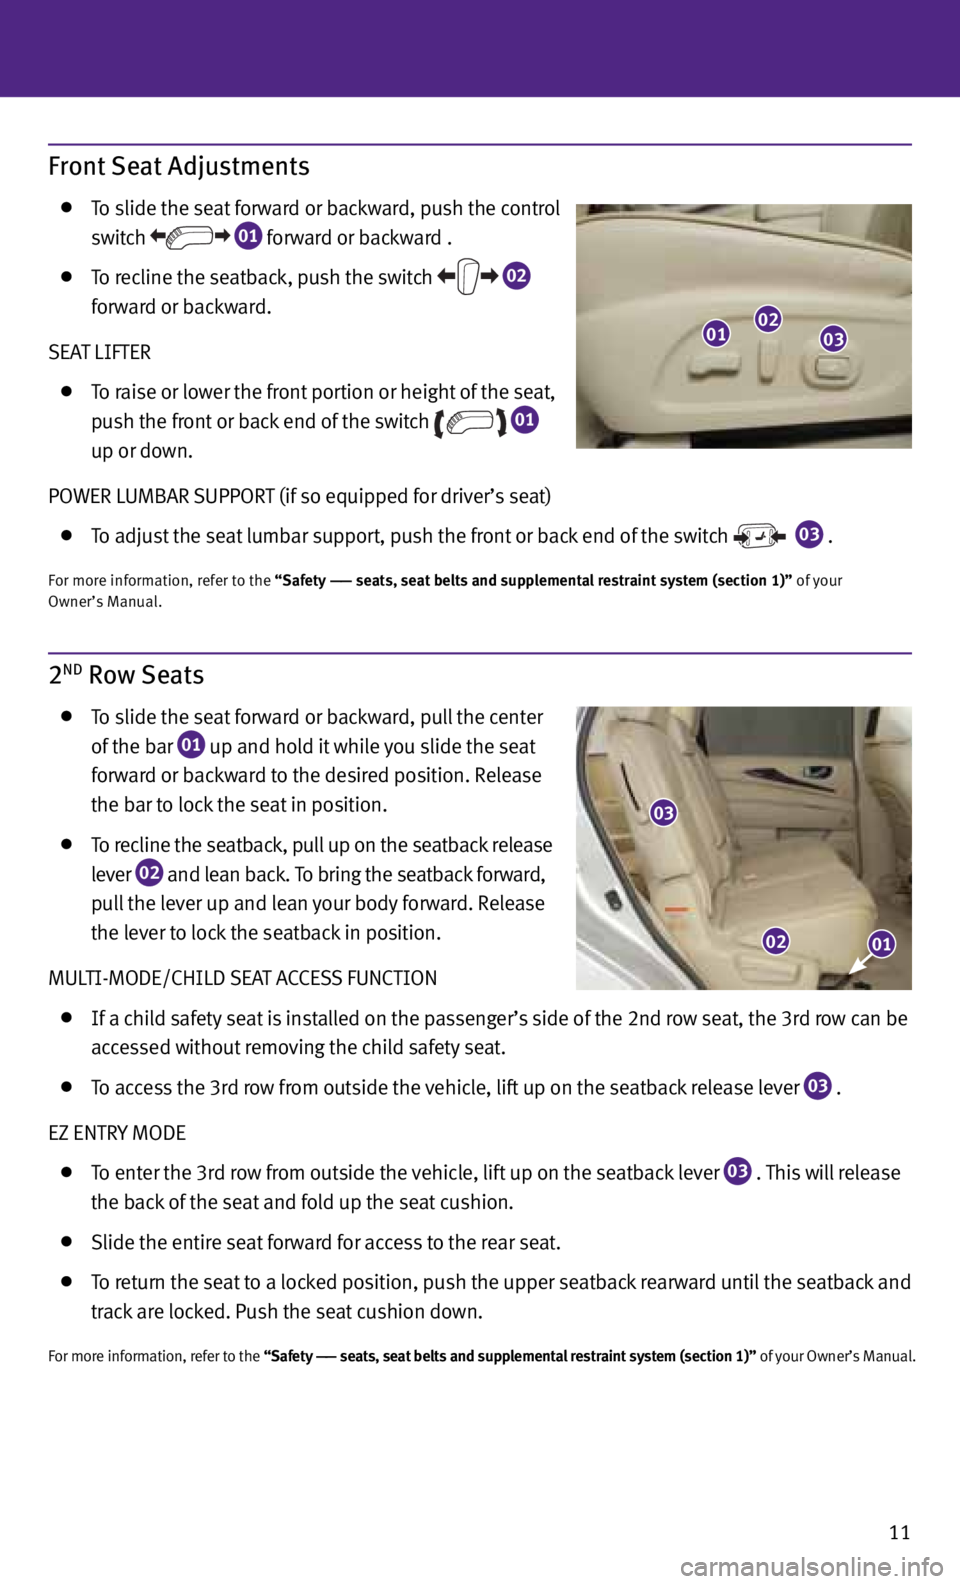 INFINITI JX 2013  Quick Reference Guide 11
Front Seat Adjustments
  To slide the seat forward or backward, push the control      
   switch
 
 01  forward or backward .
 
 
  To recline the seatback, push the switch
  02      
    forward o